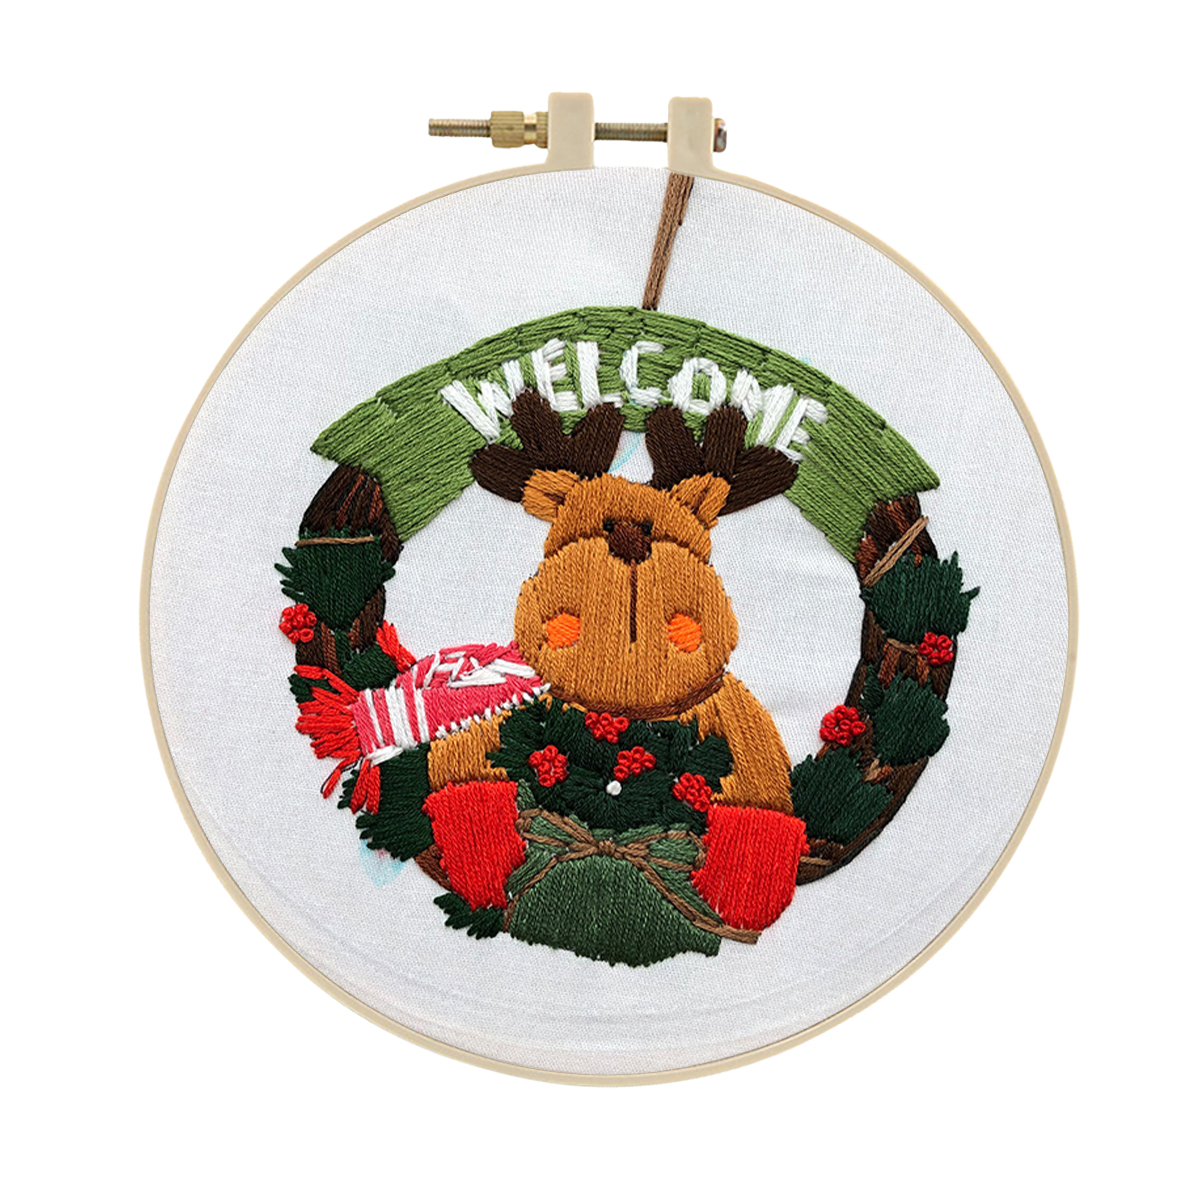 Christmas Embroidery Kits Cross stitch kits for Adult Beginner - Elk Welcome Pattern